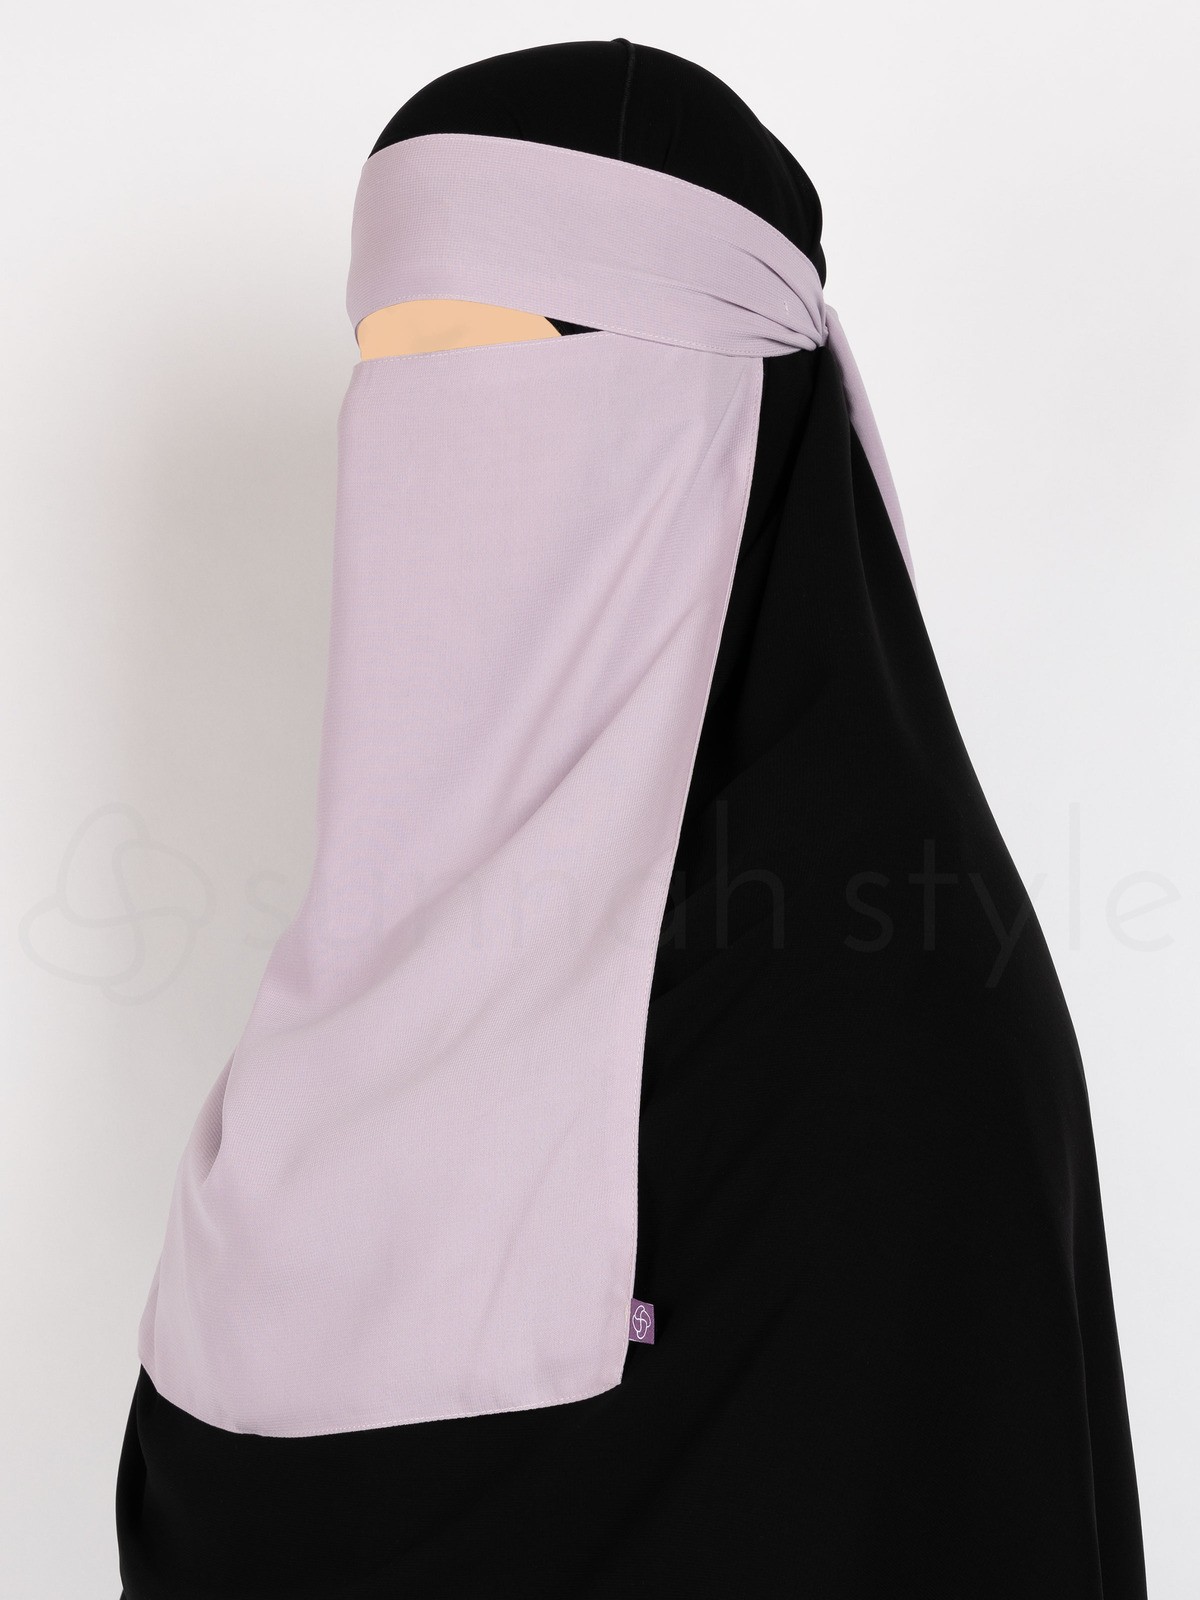 Sunnah Style - Pull-Down One Layer Niqab (Cement)